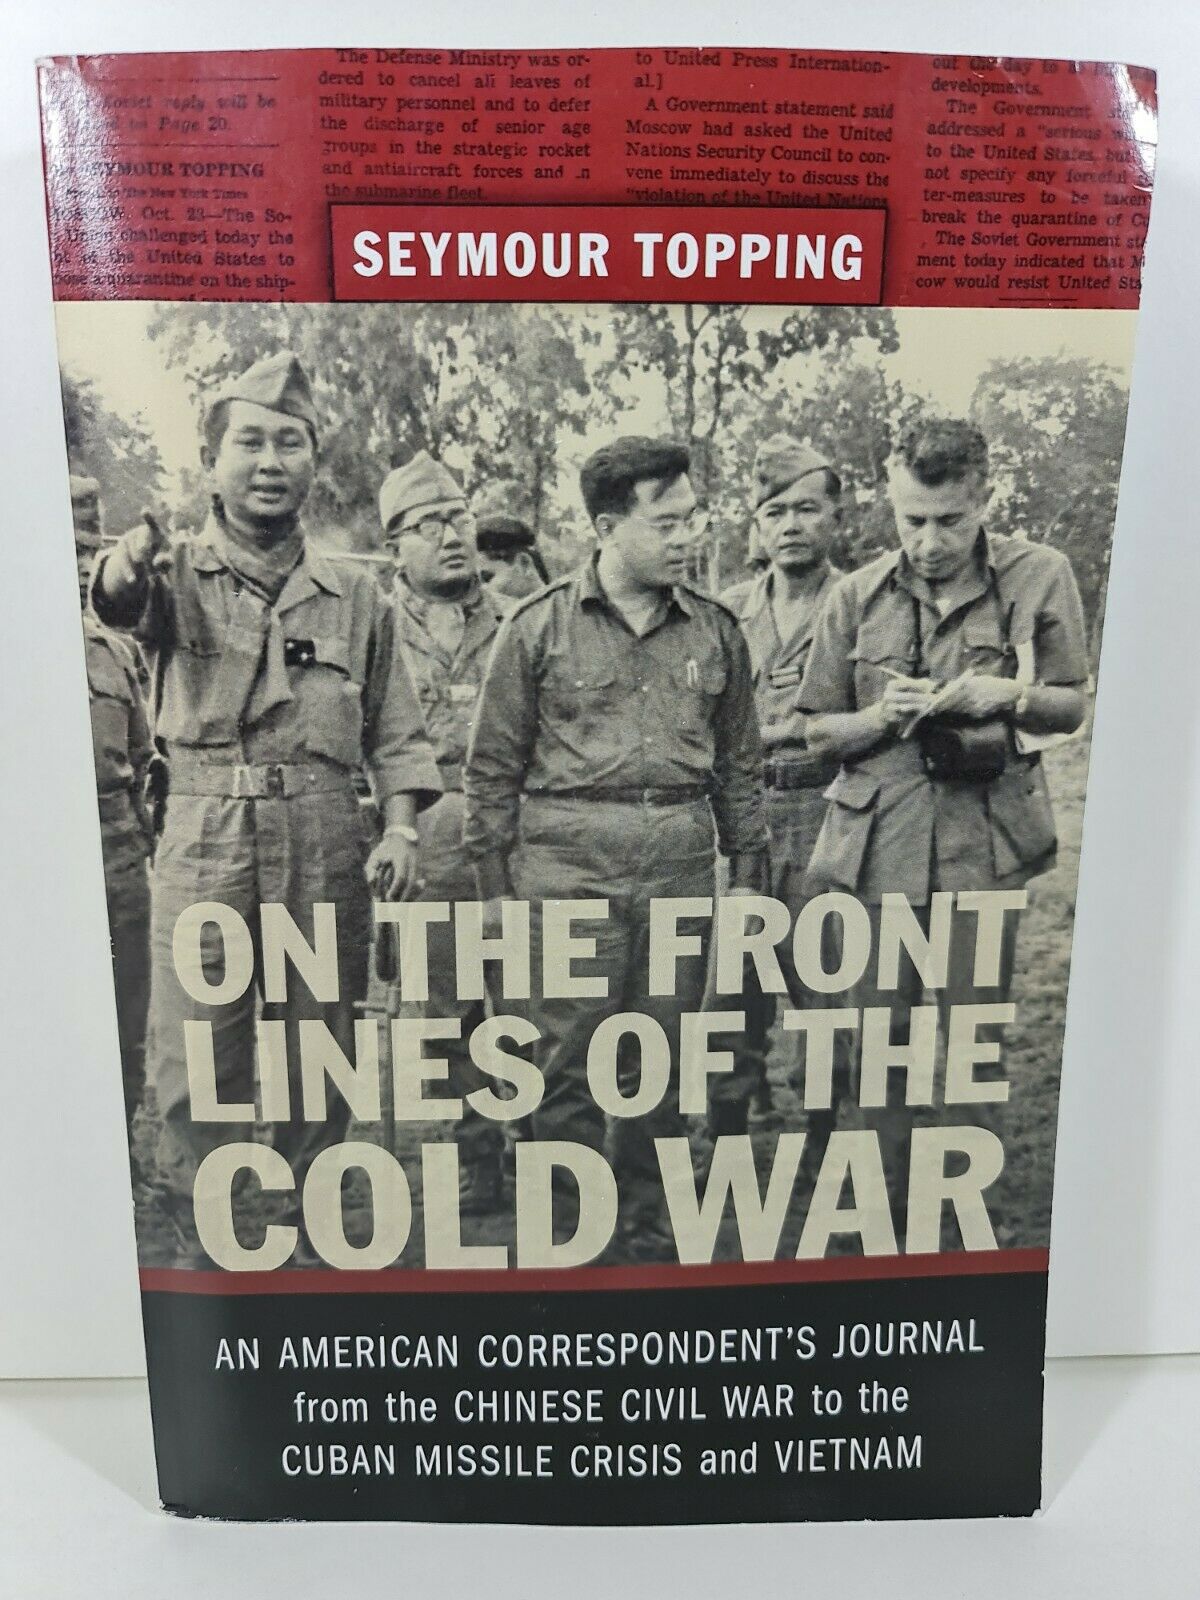 On the Front Lines of the Cold War by Seymour Topping